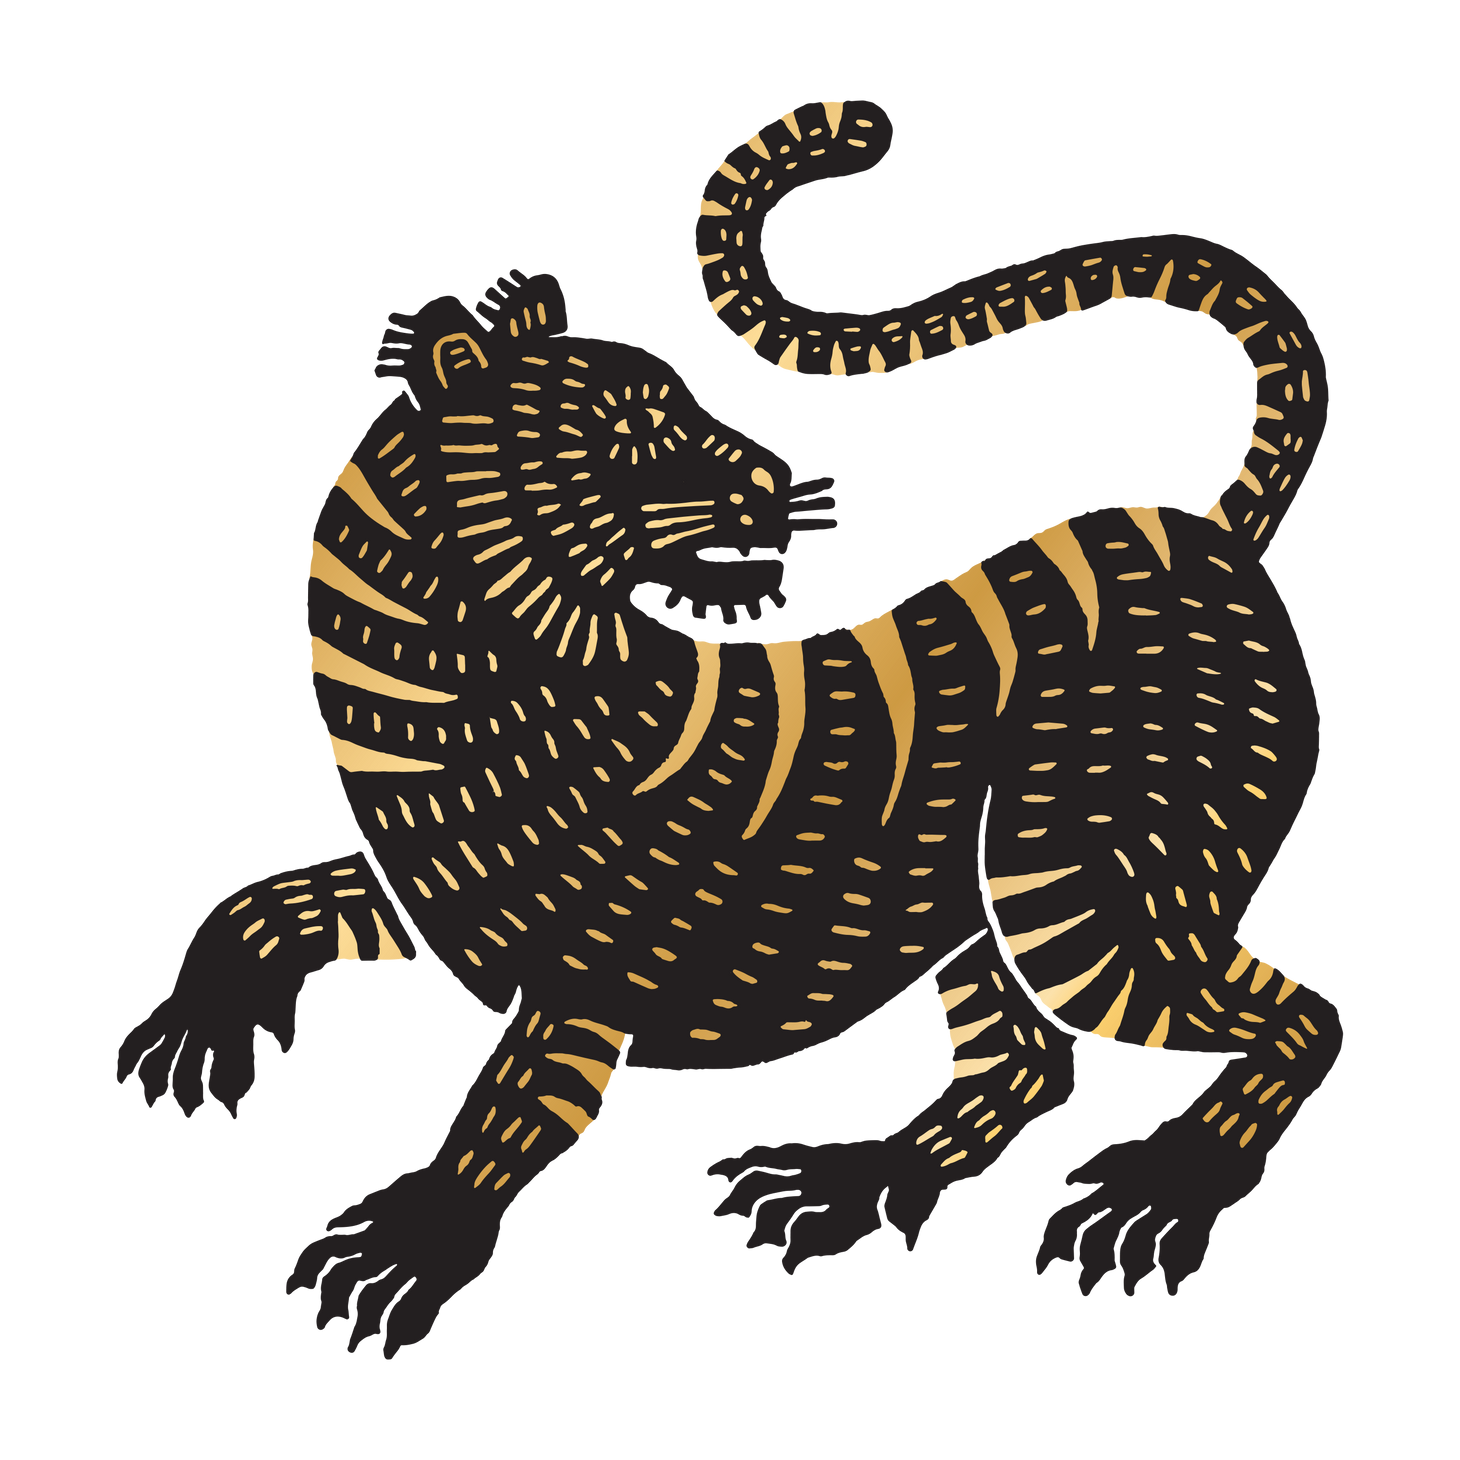 Tiger Silhouette In Black Tribal Tattoo Style Vector Art